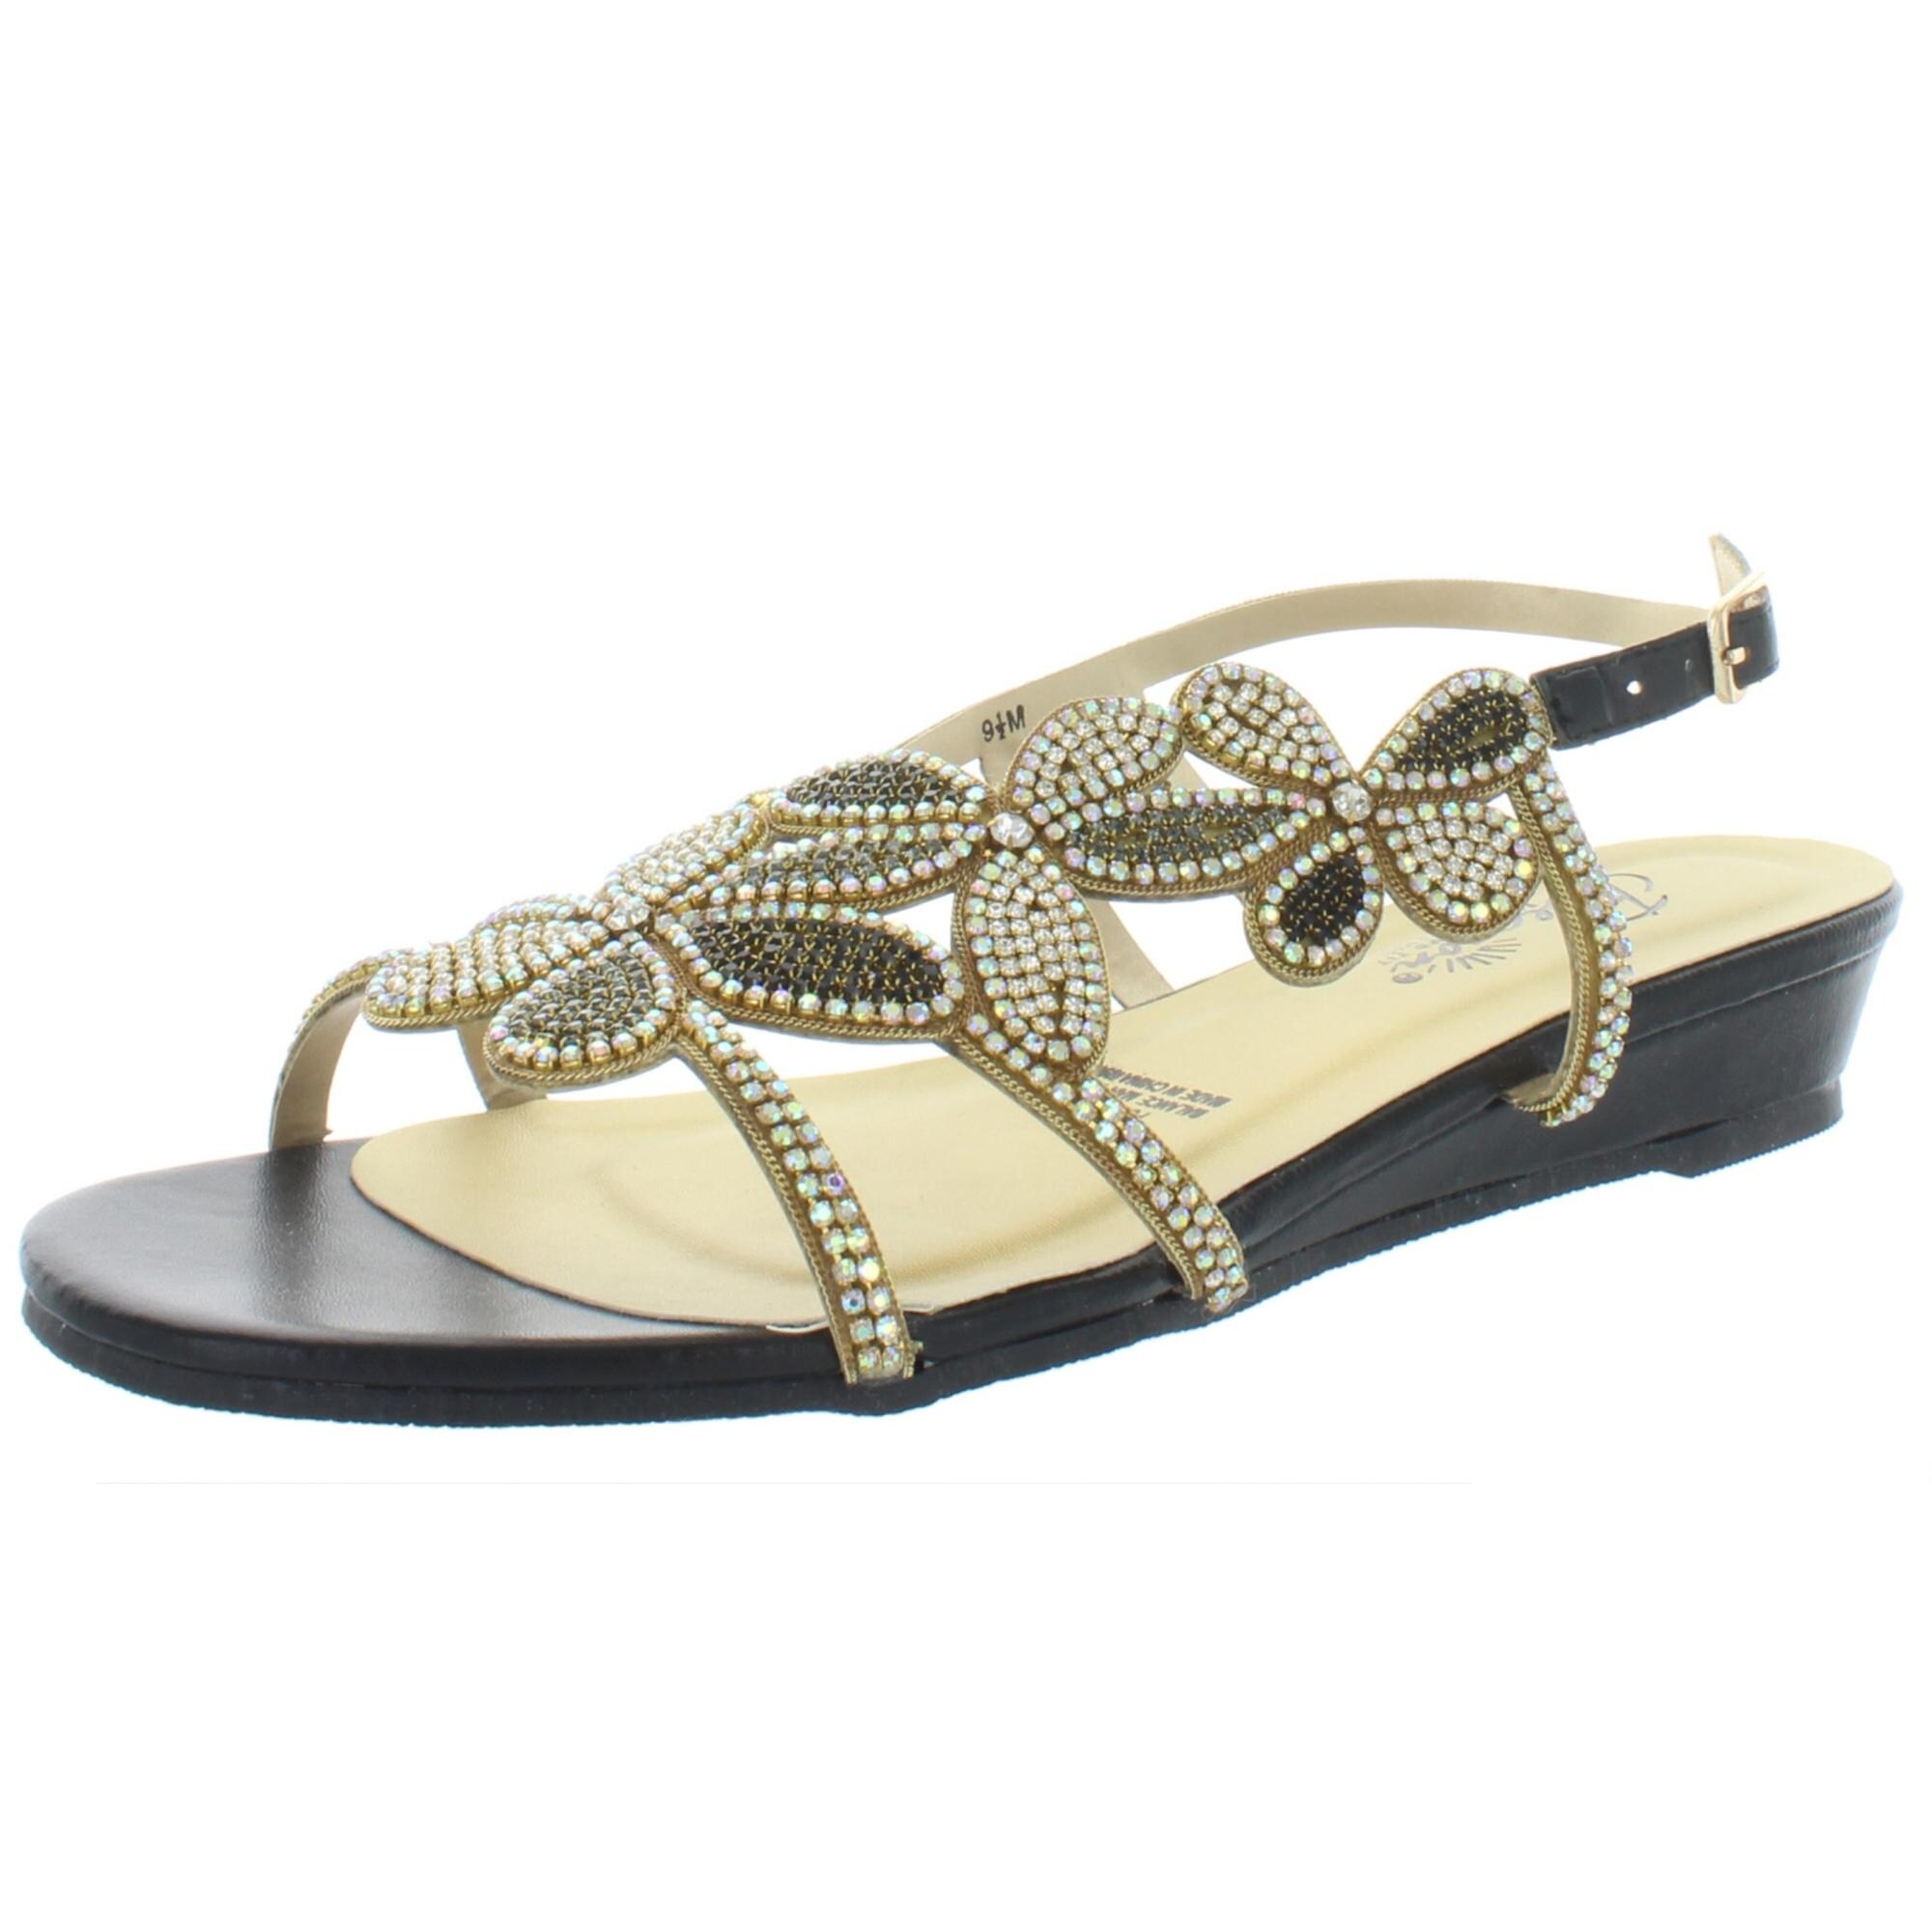 jeweled strappy sandals